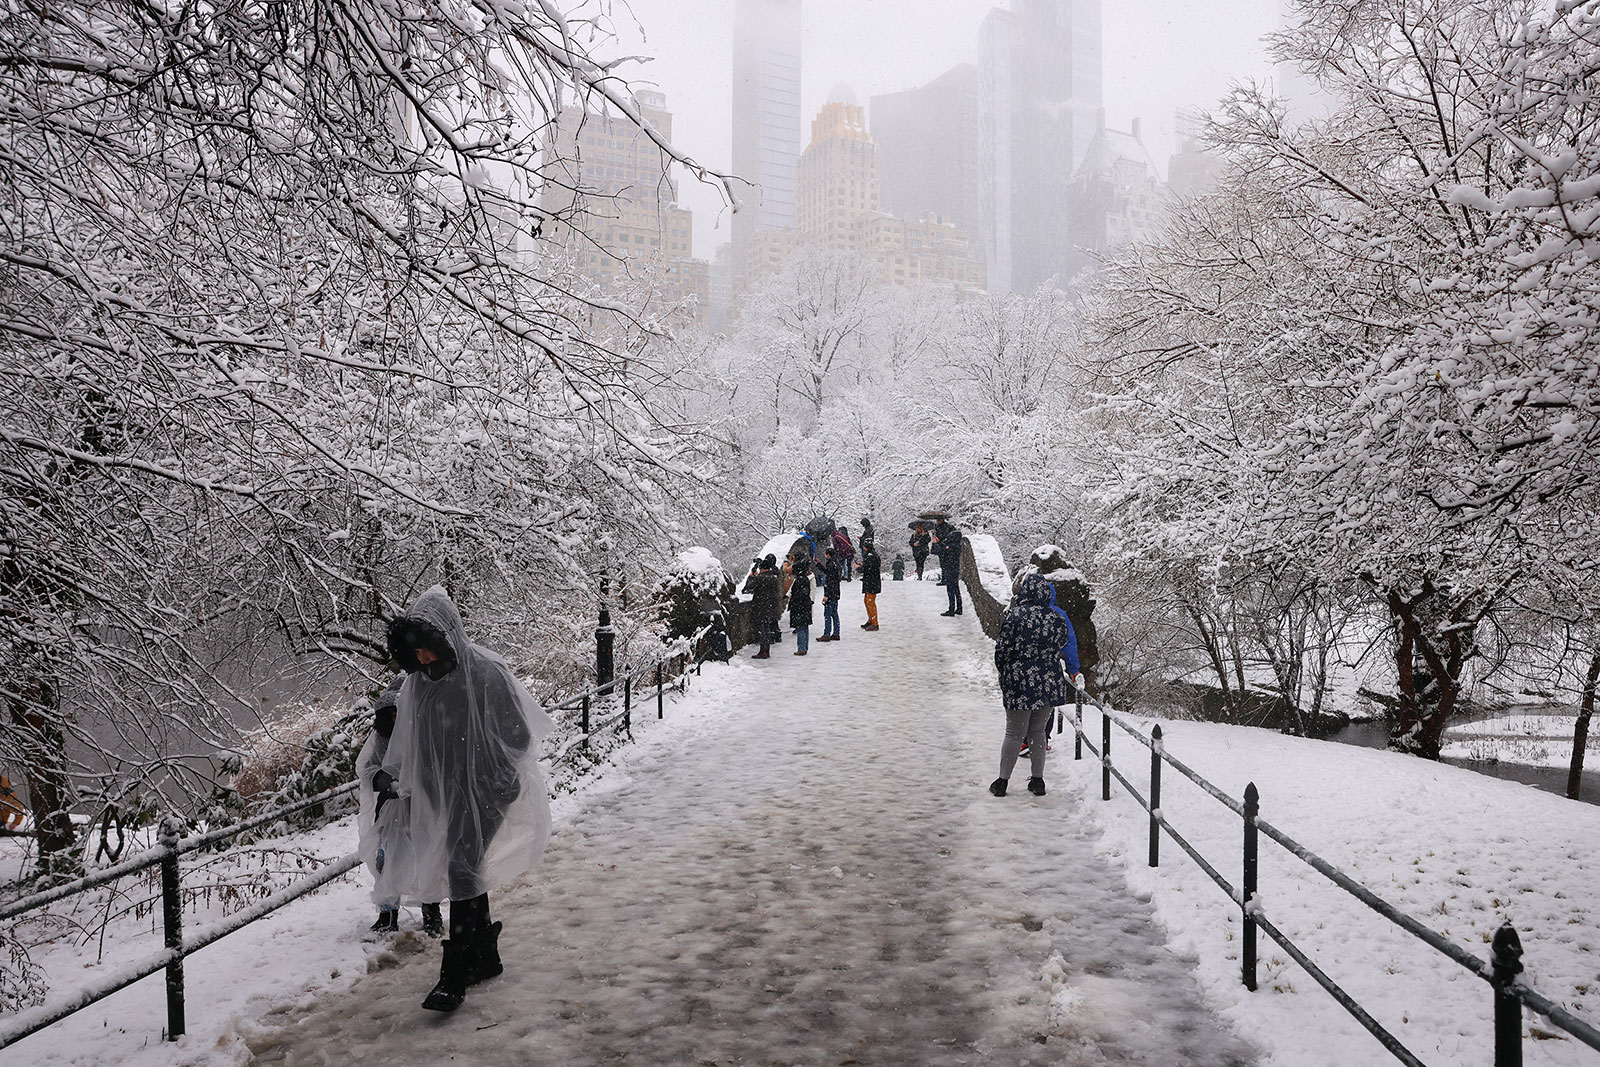 People walk through the falling snow in Central Park on Tuesday in New York.